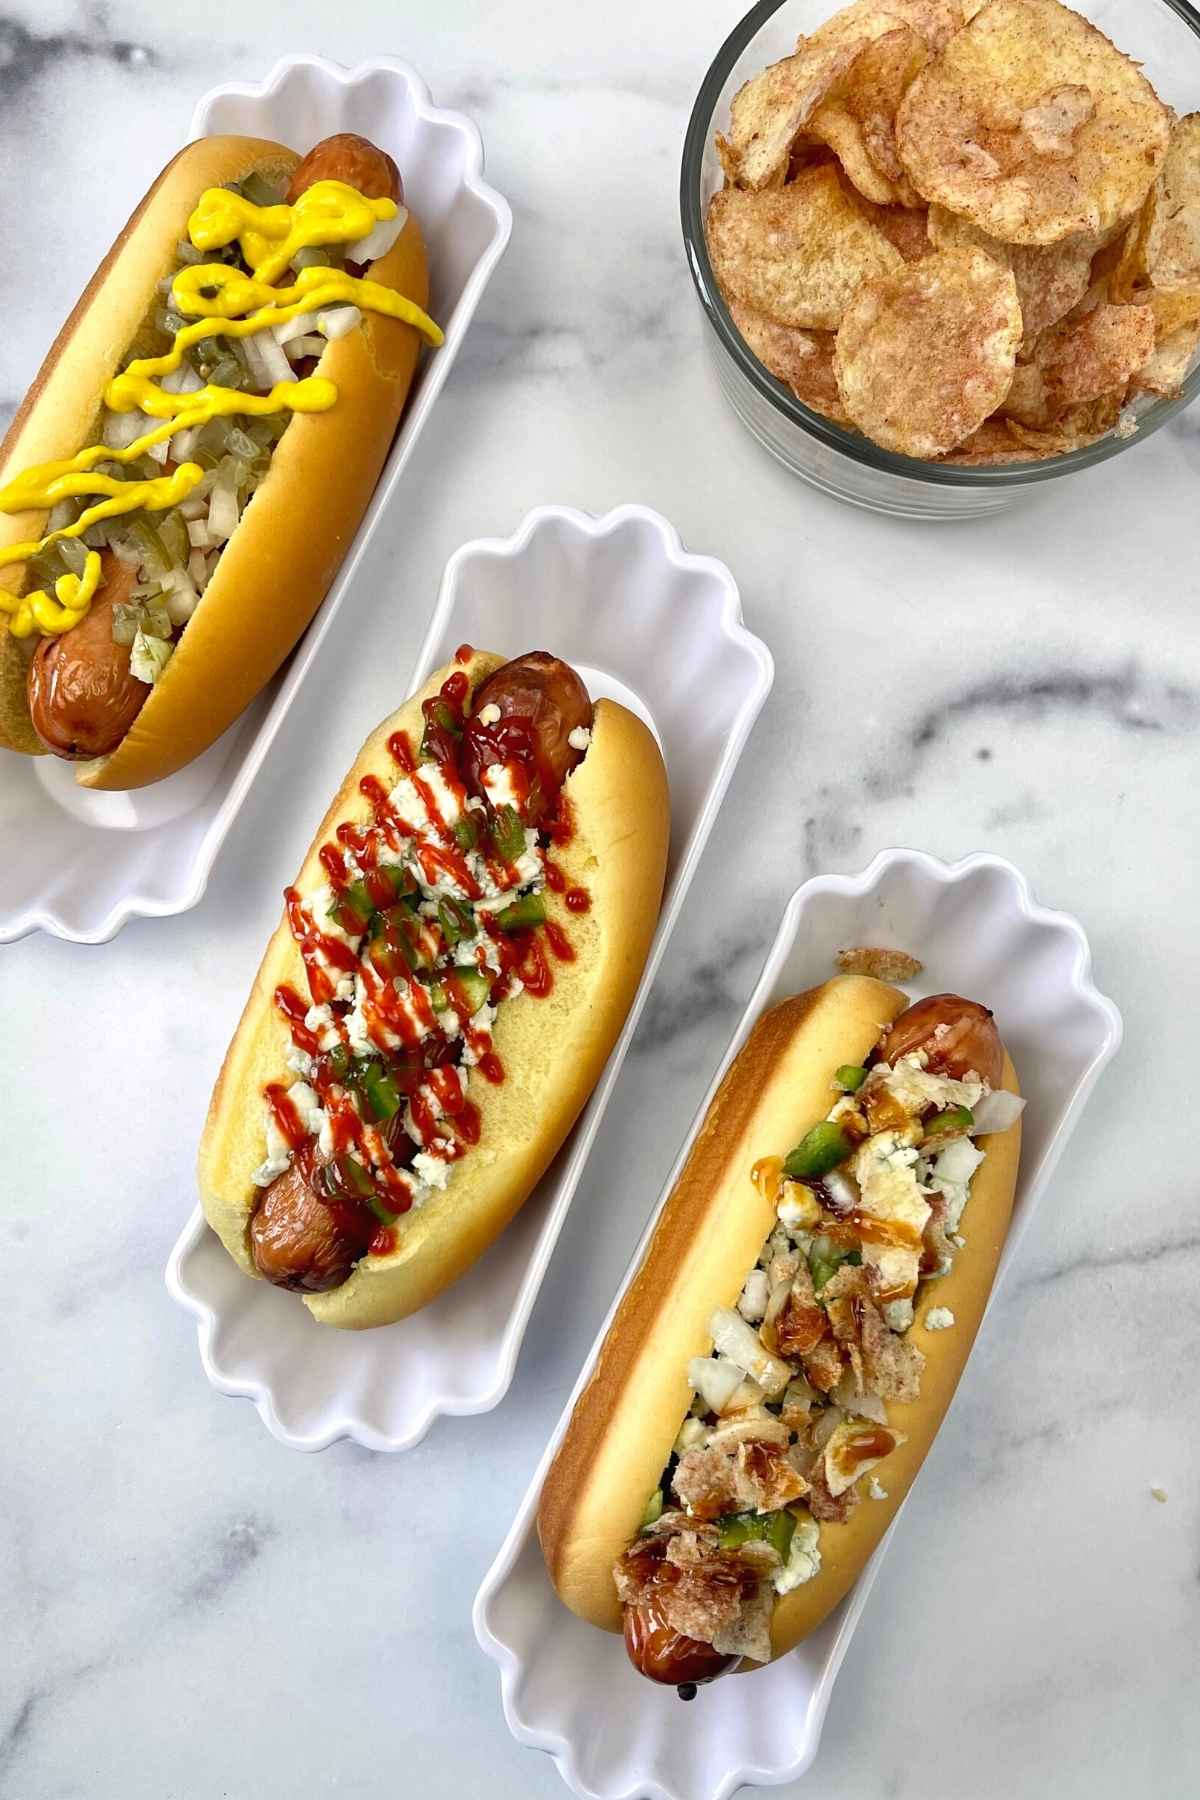 Three hot dogs in buns with different toppings.